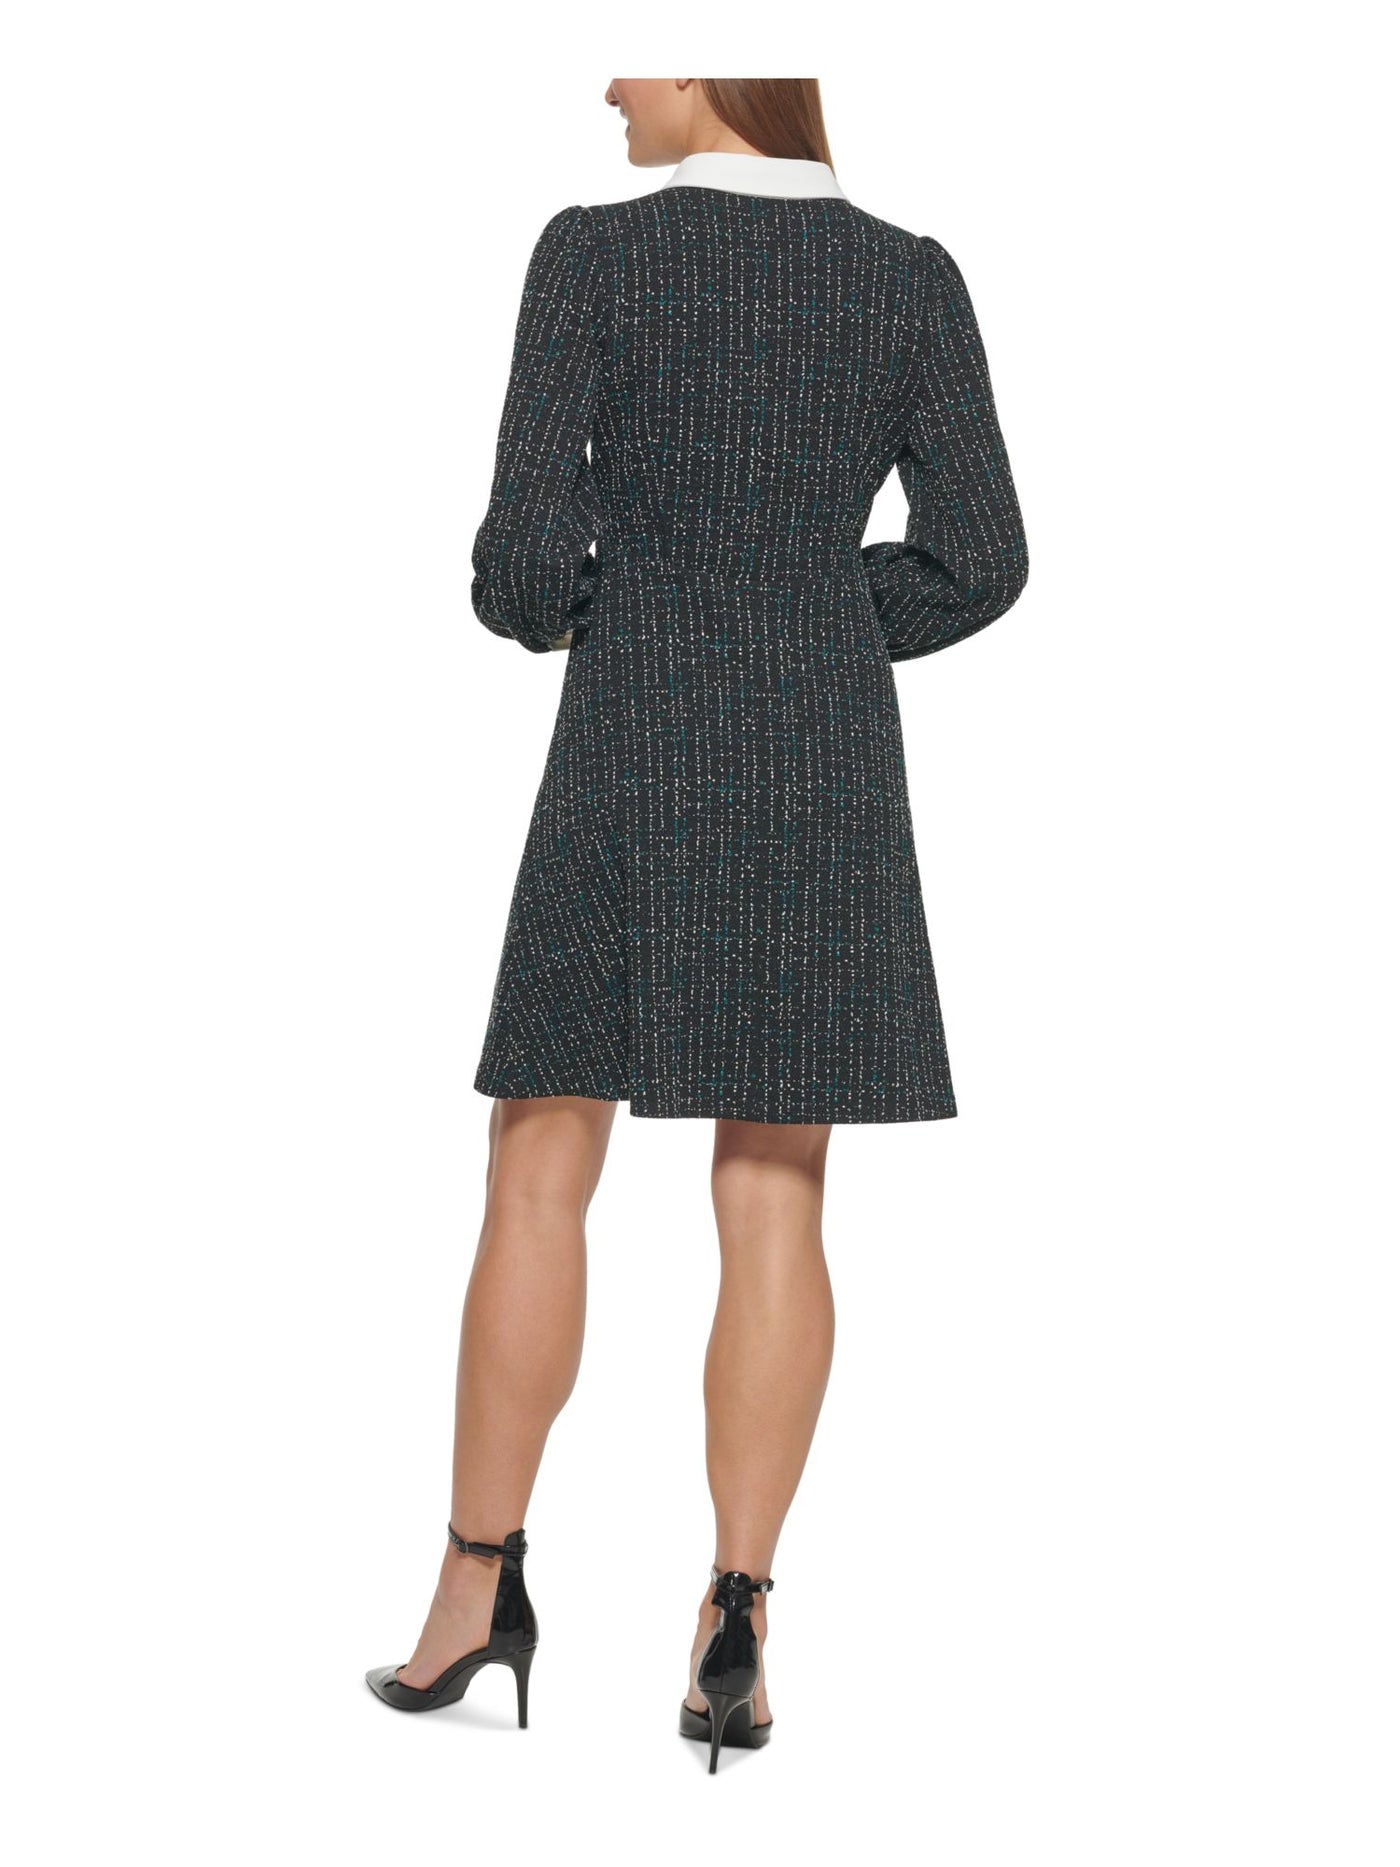 DKNY Womens Stretch Textured Cuffed Sleeve Collared Short Wear To Work Fit + Flare Dress